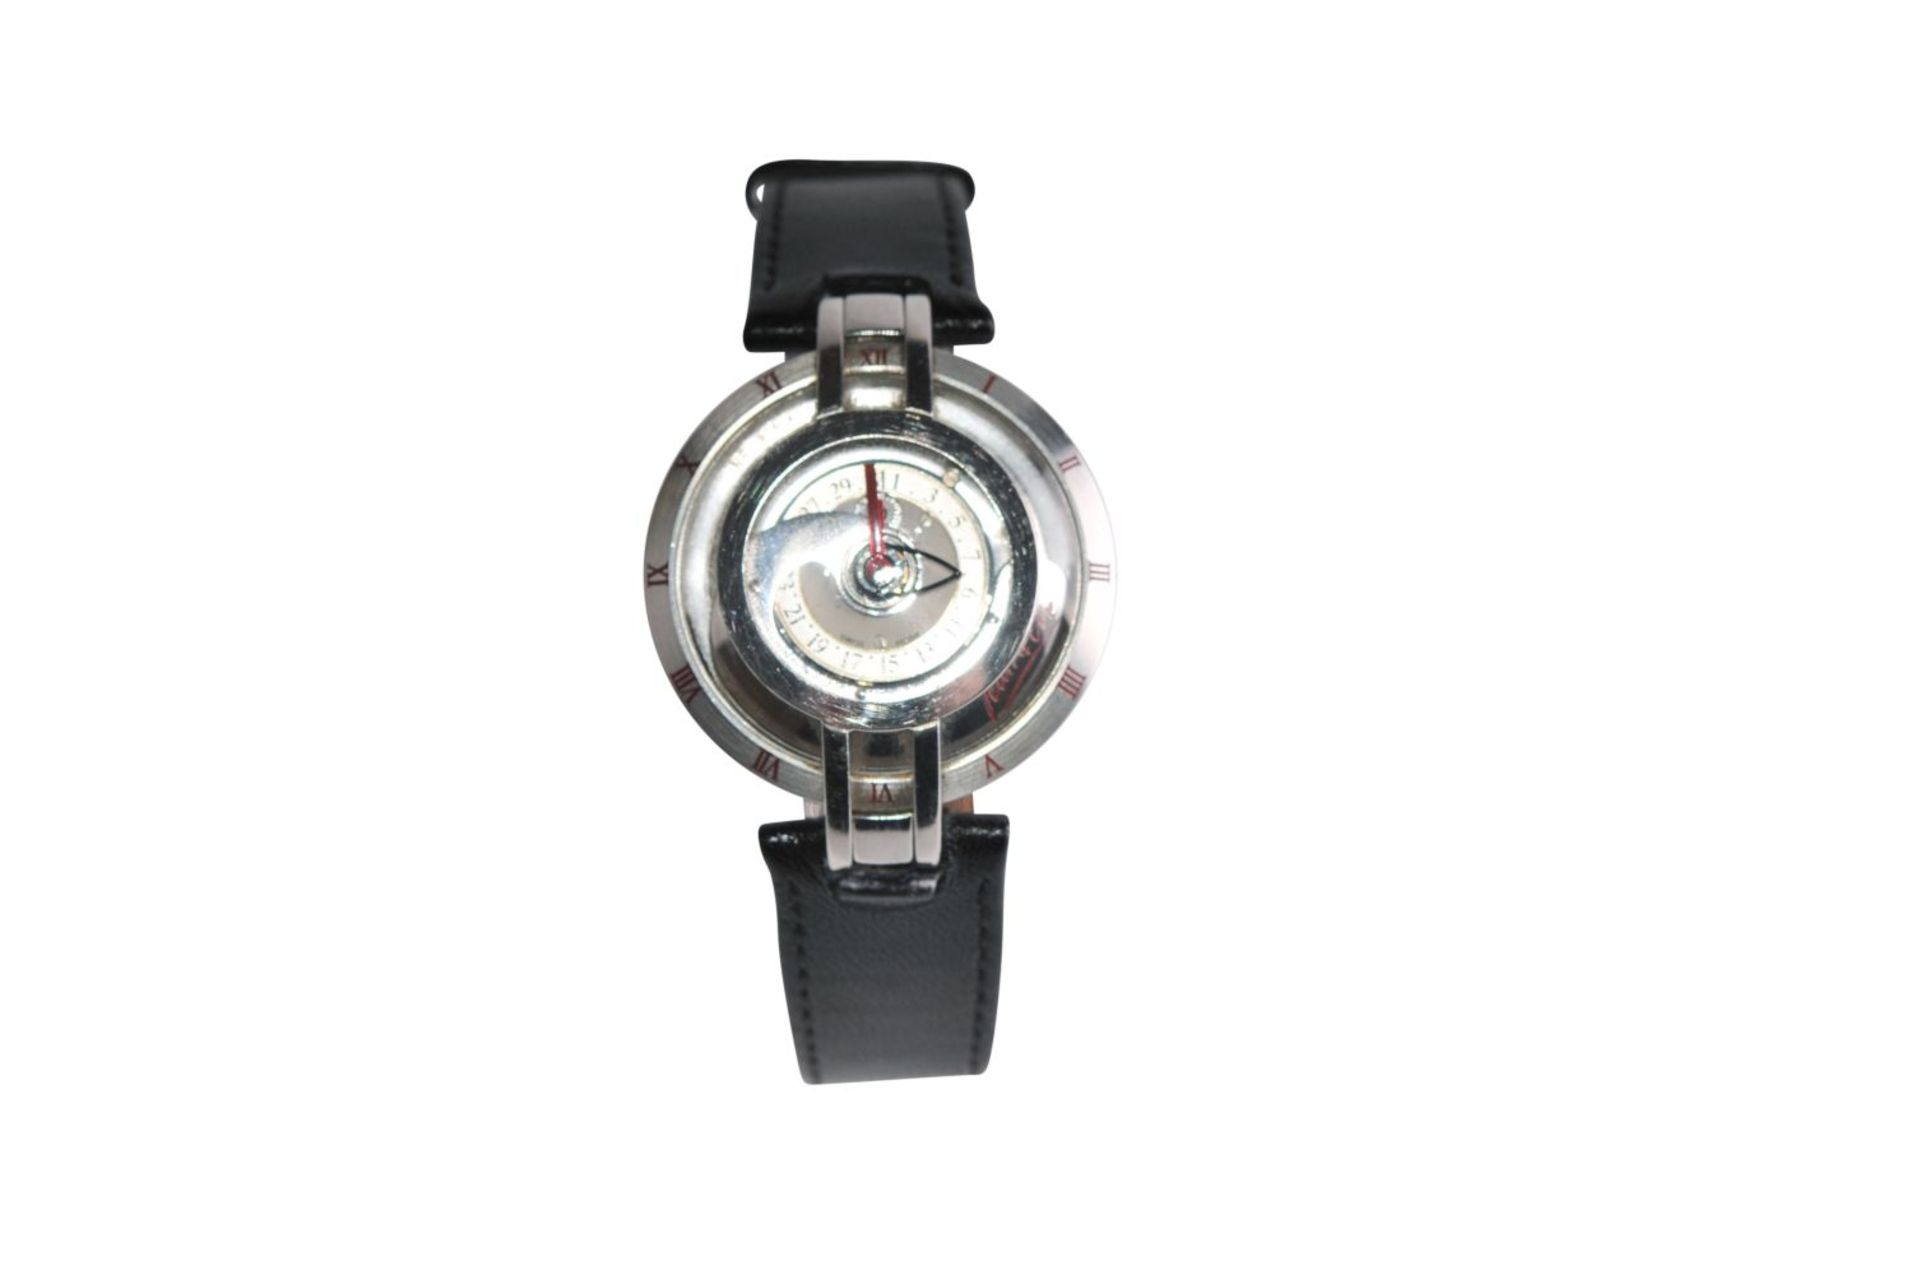 Jean d´Eve SamaraThe first automatic quartz watch built in 1988 by LePhare, Jean d'Eve, for the